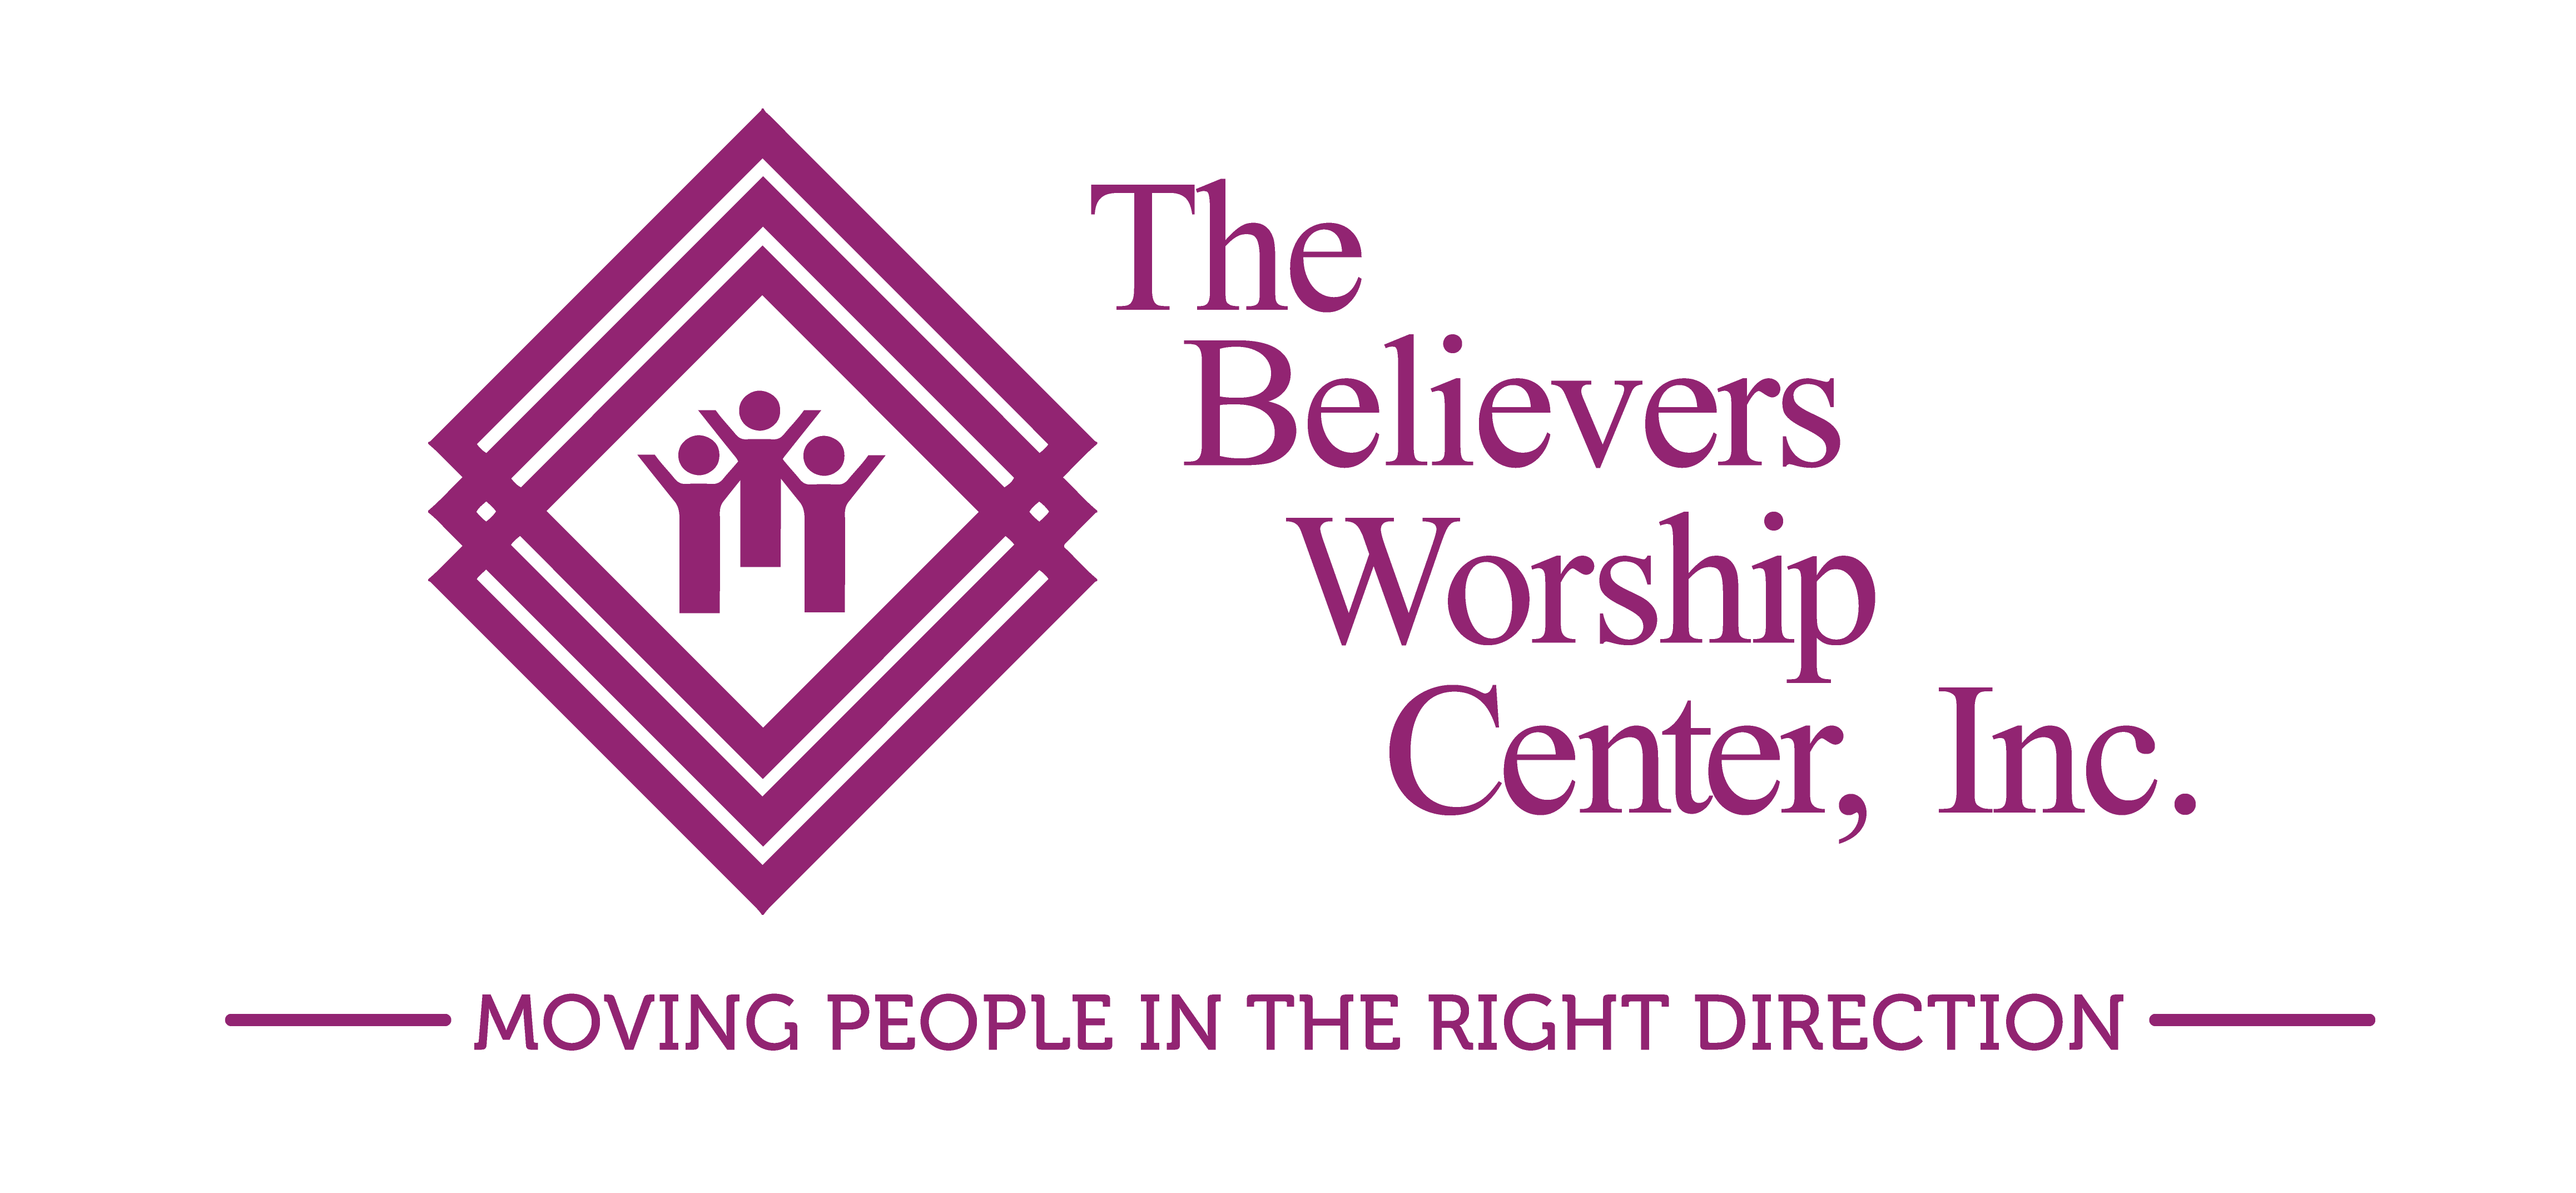 The Believers Worship Center, Inc.